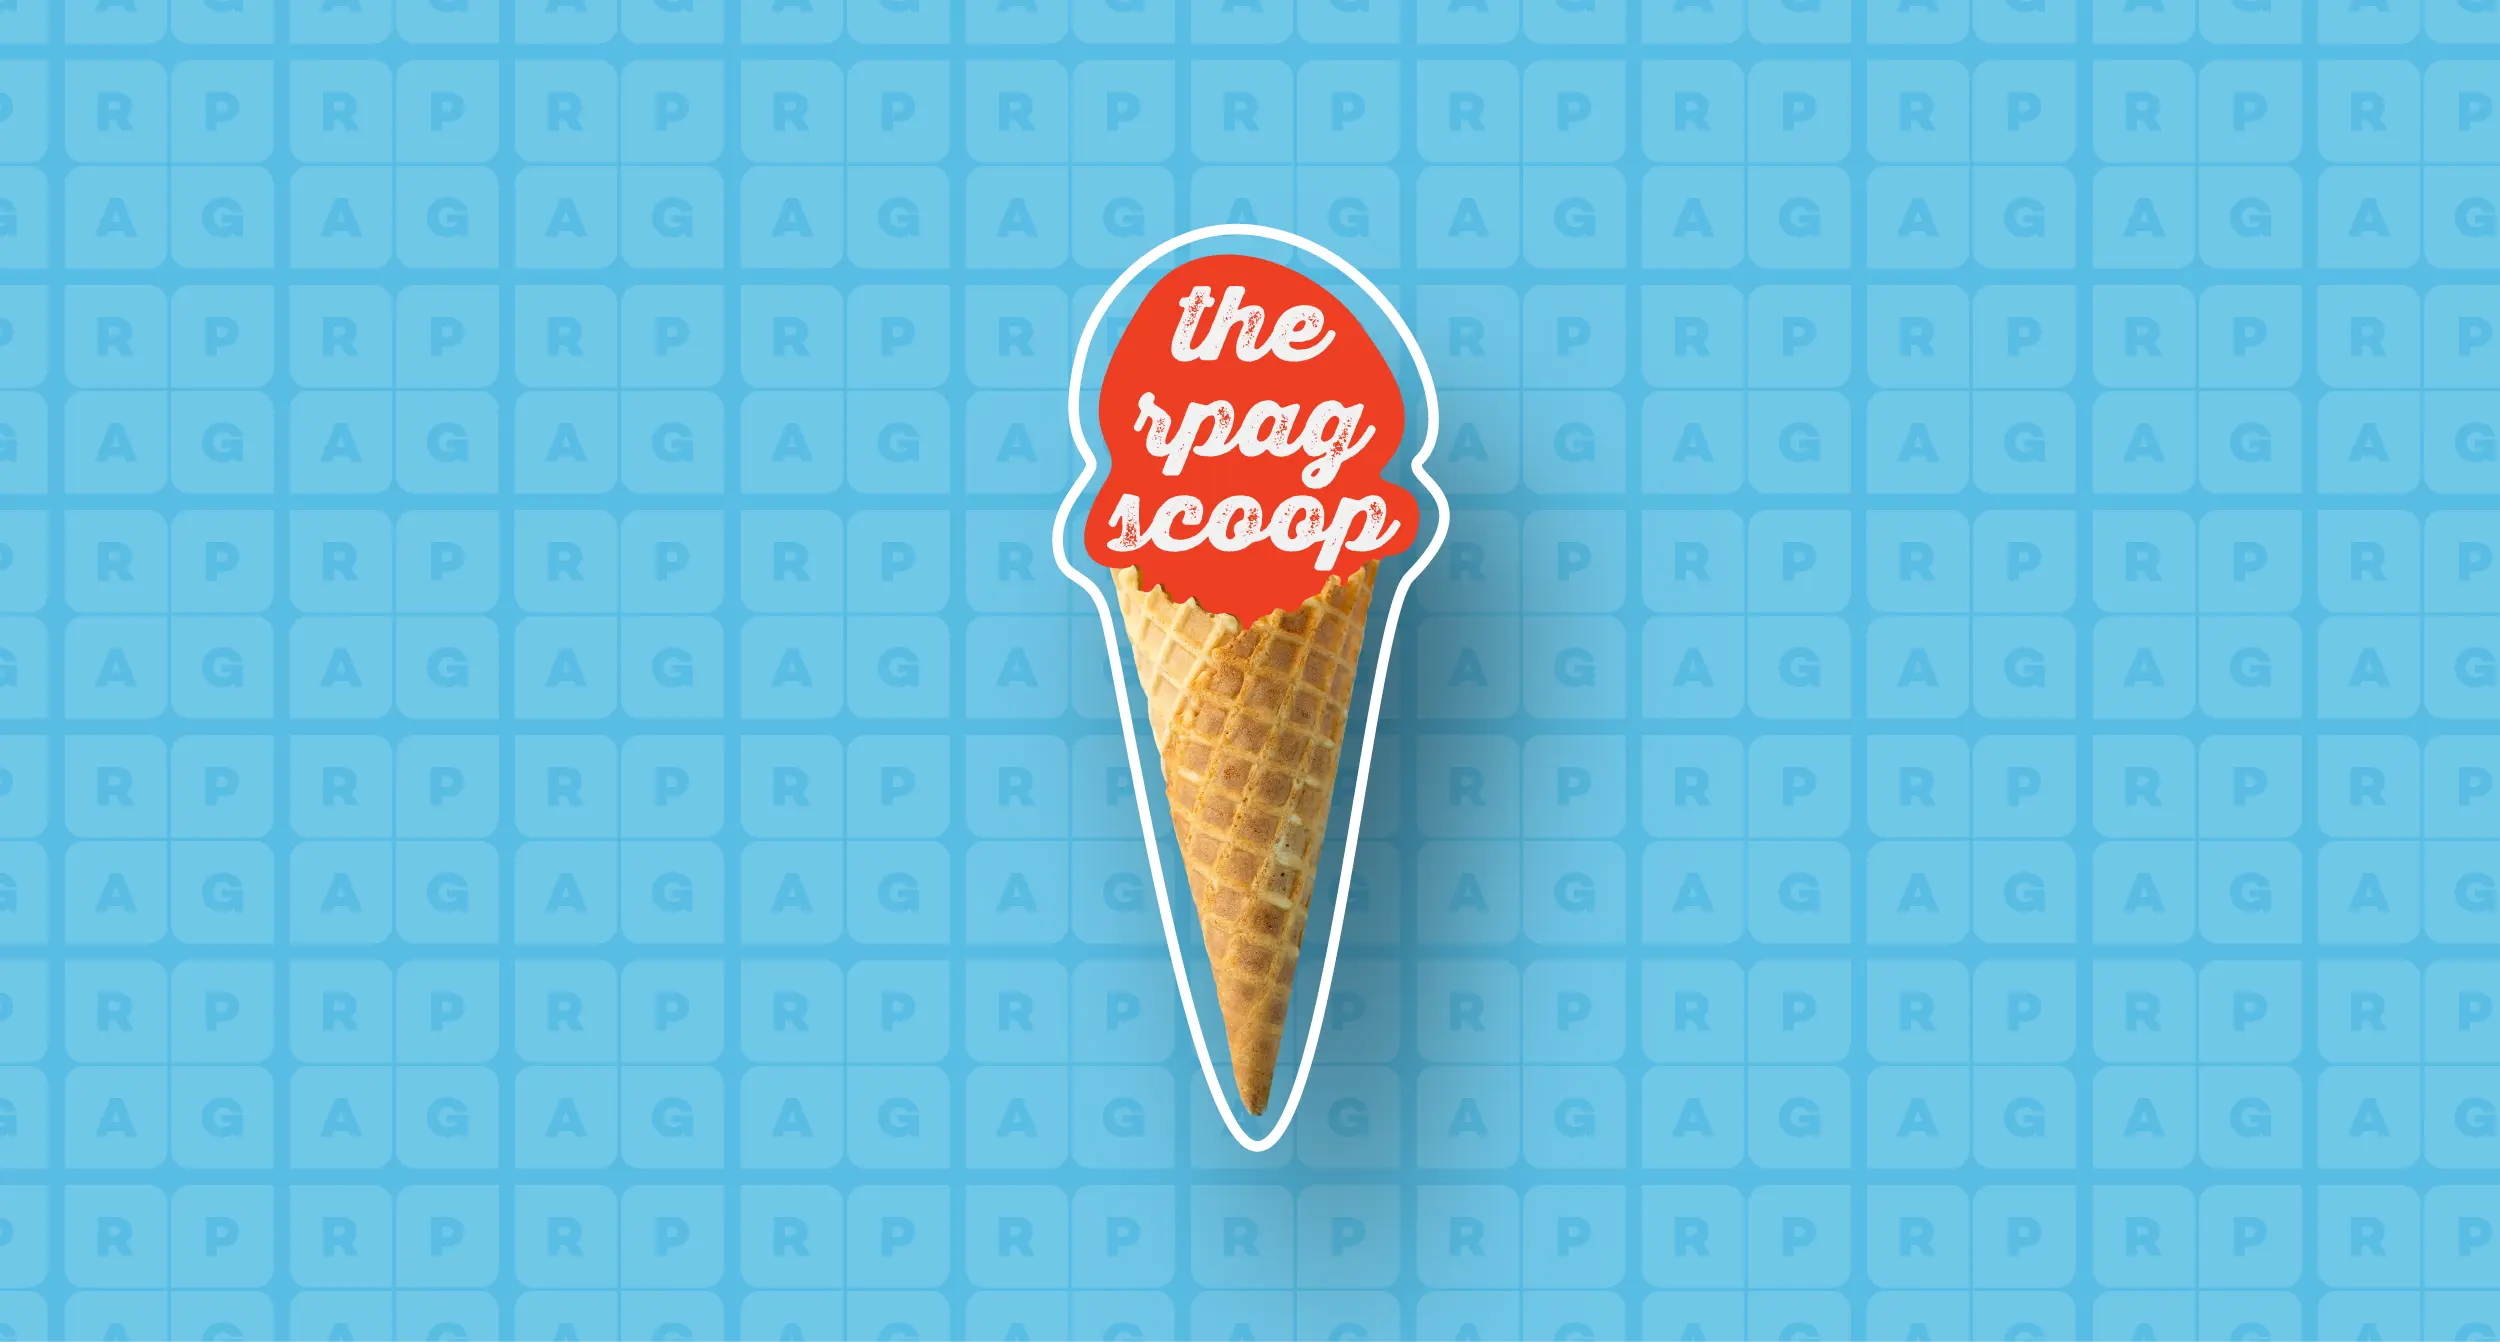 the RPAG Scoop written inside an ice cream cone with a blue 